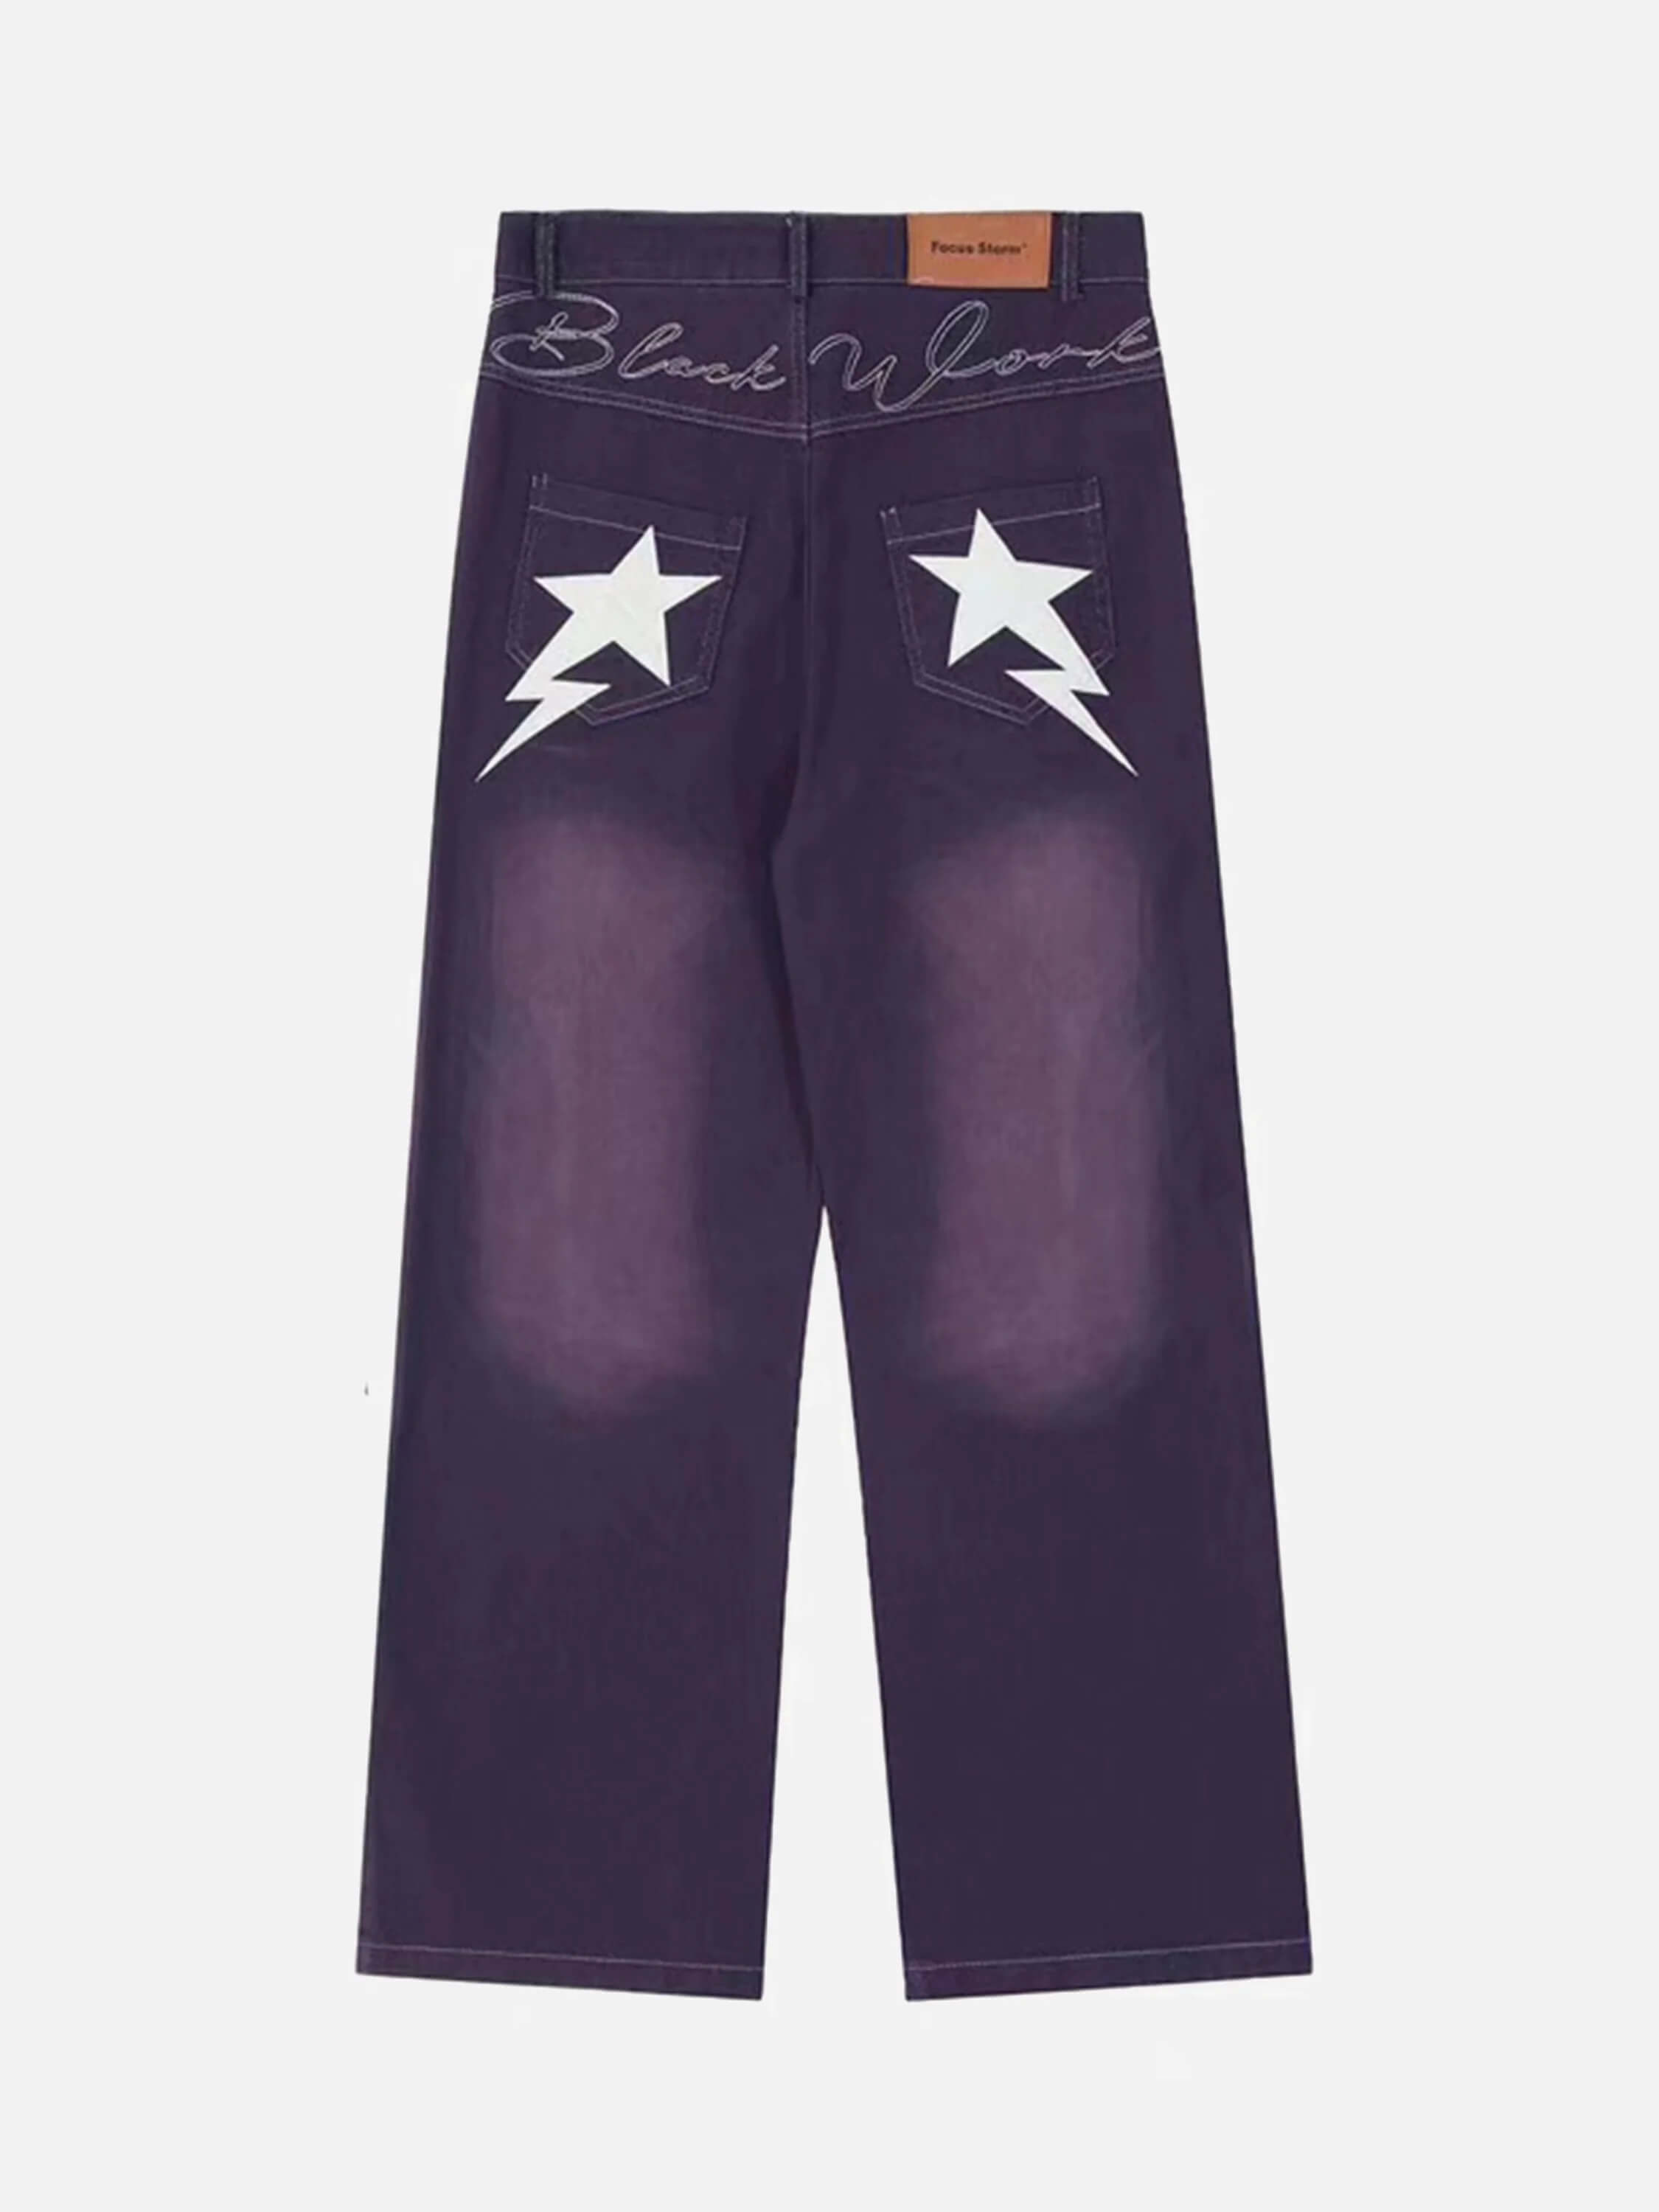 American High Street Star Embroidered Jeans-2216